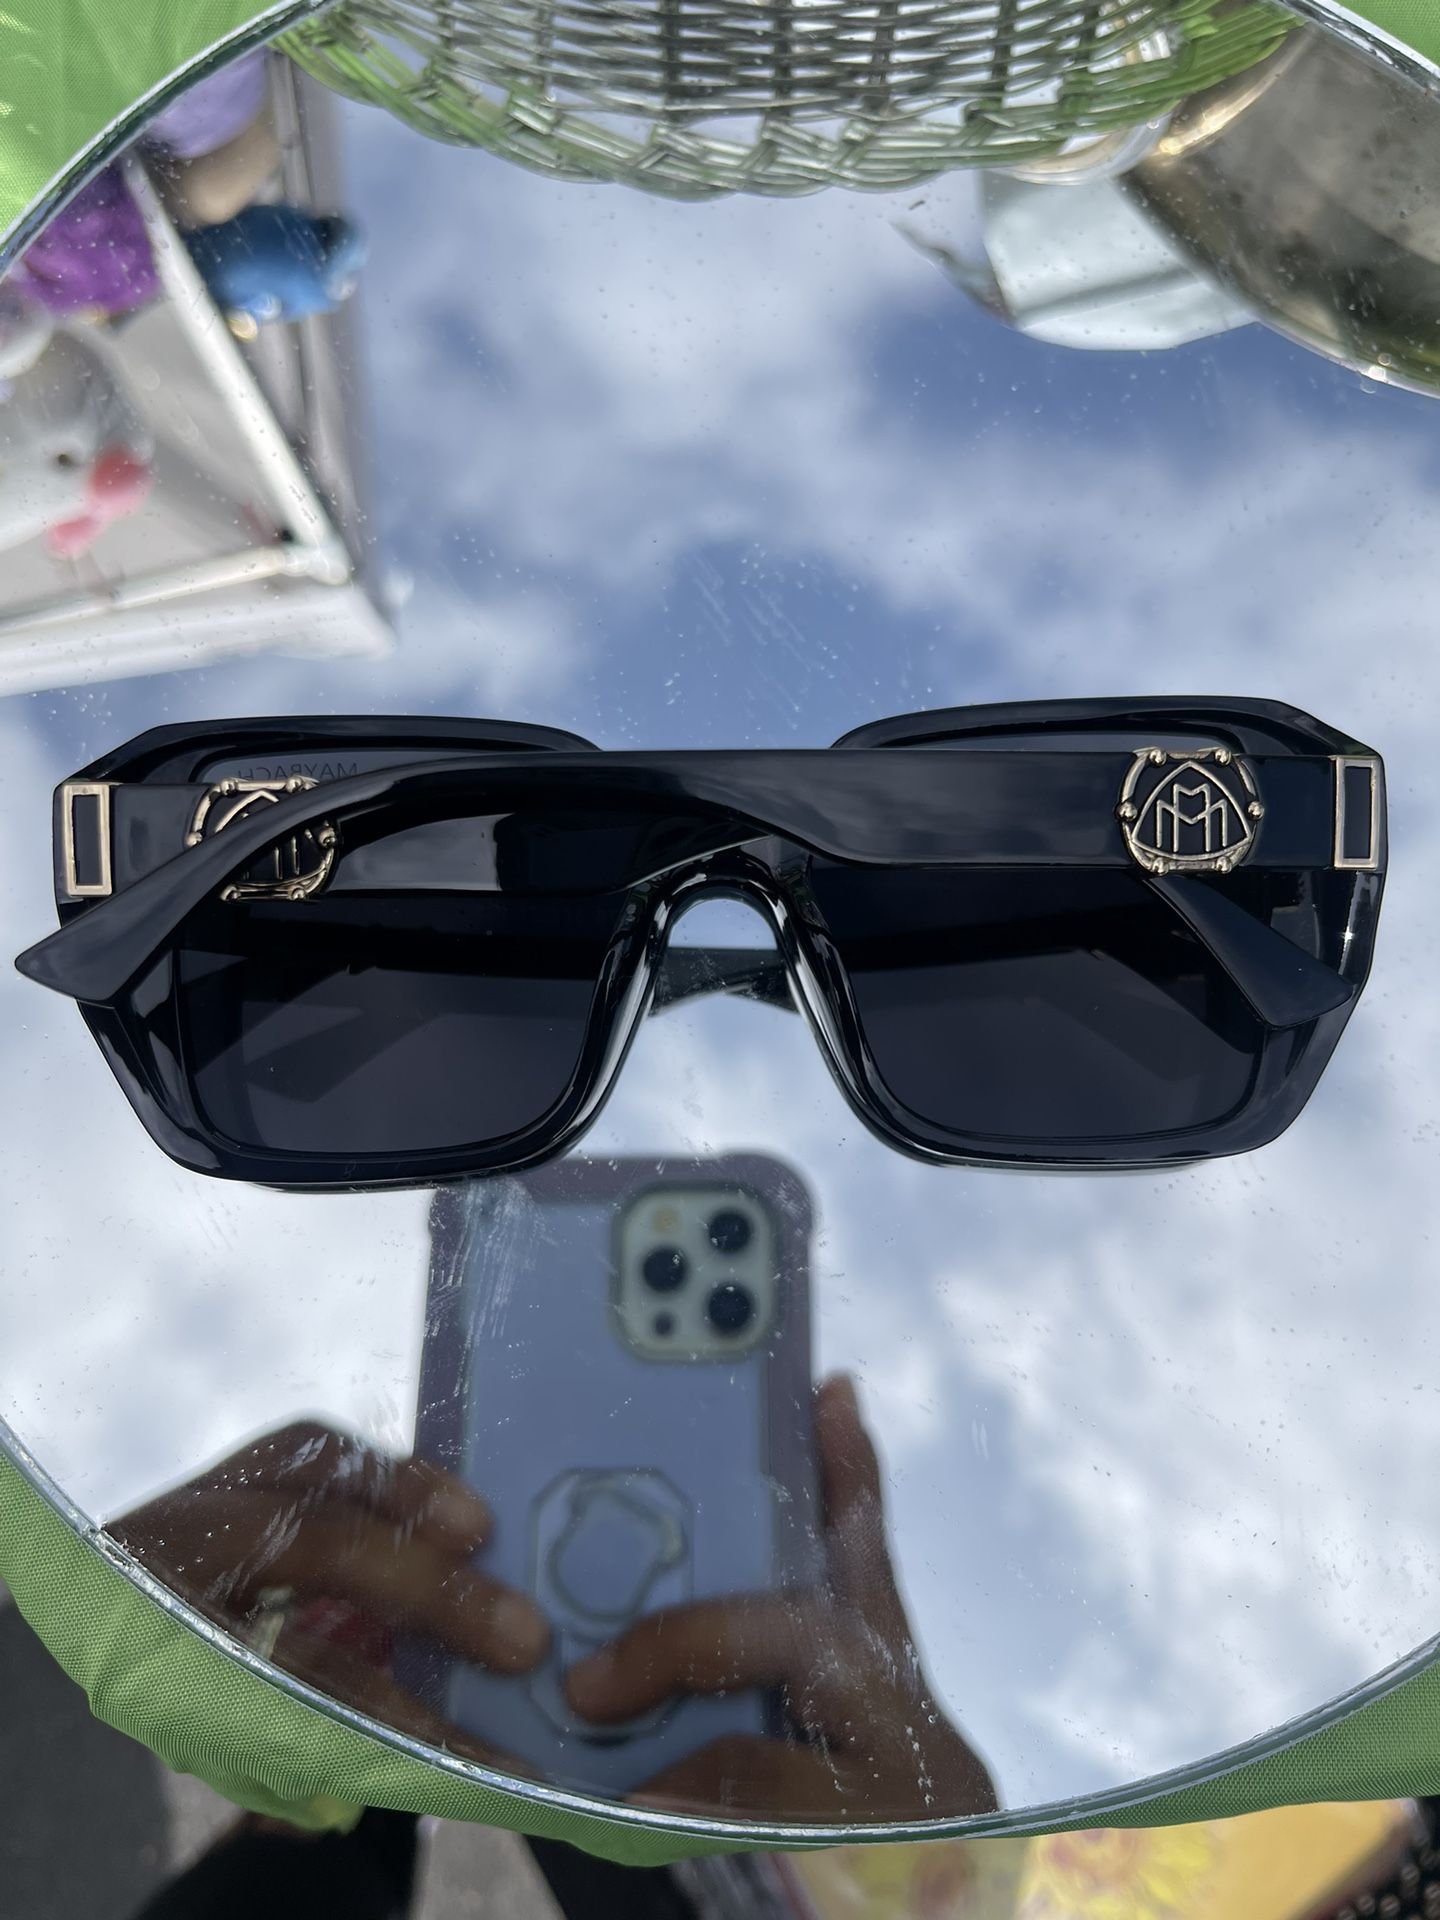 Maybach Sunglasses 100% Authentic 